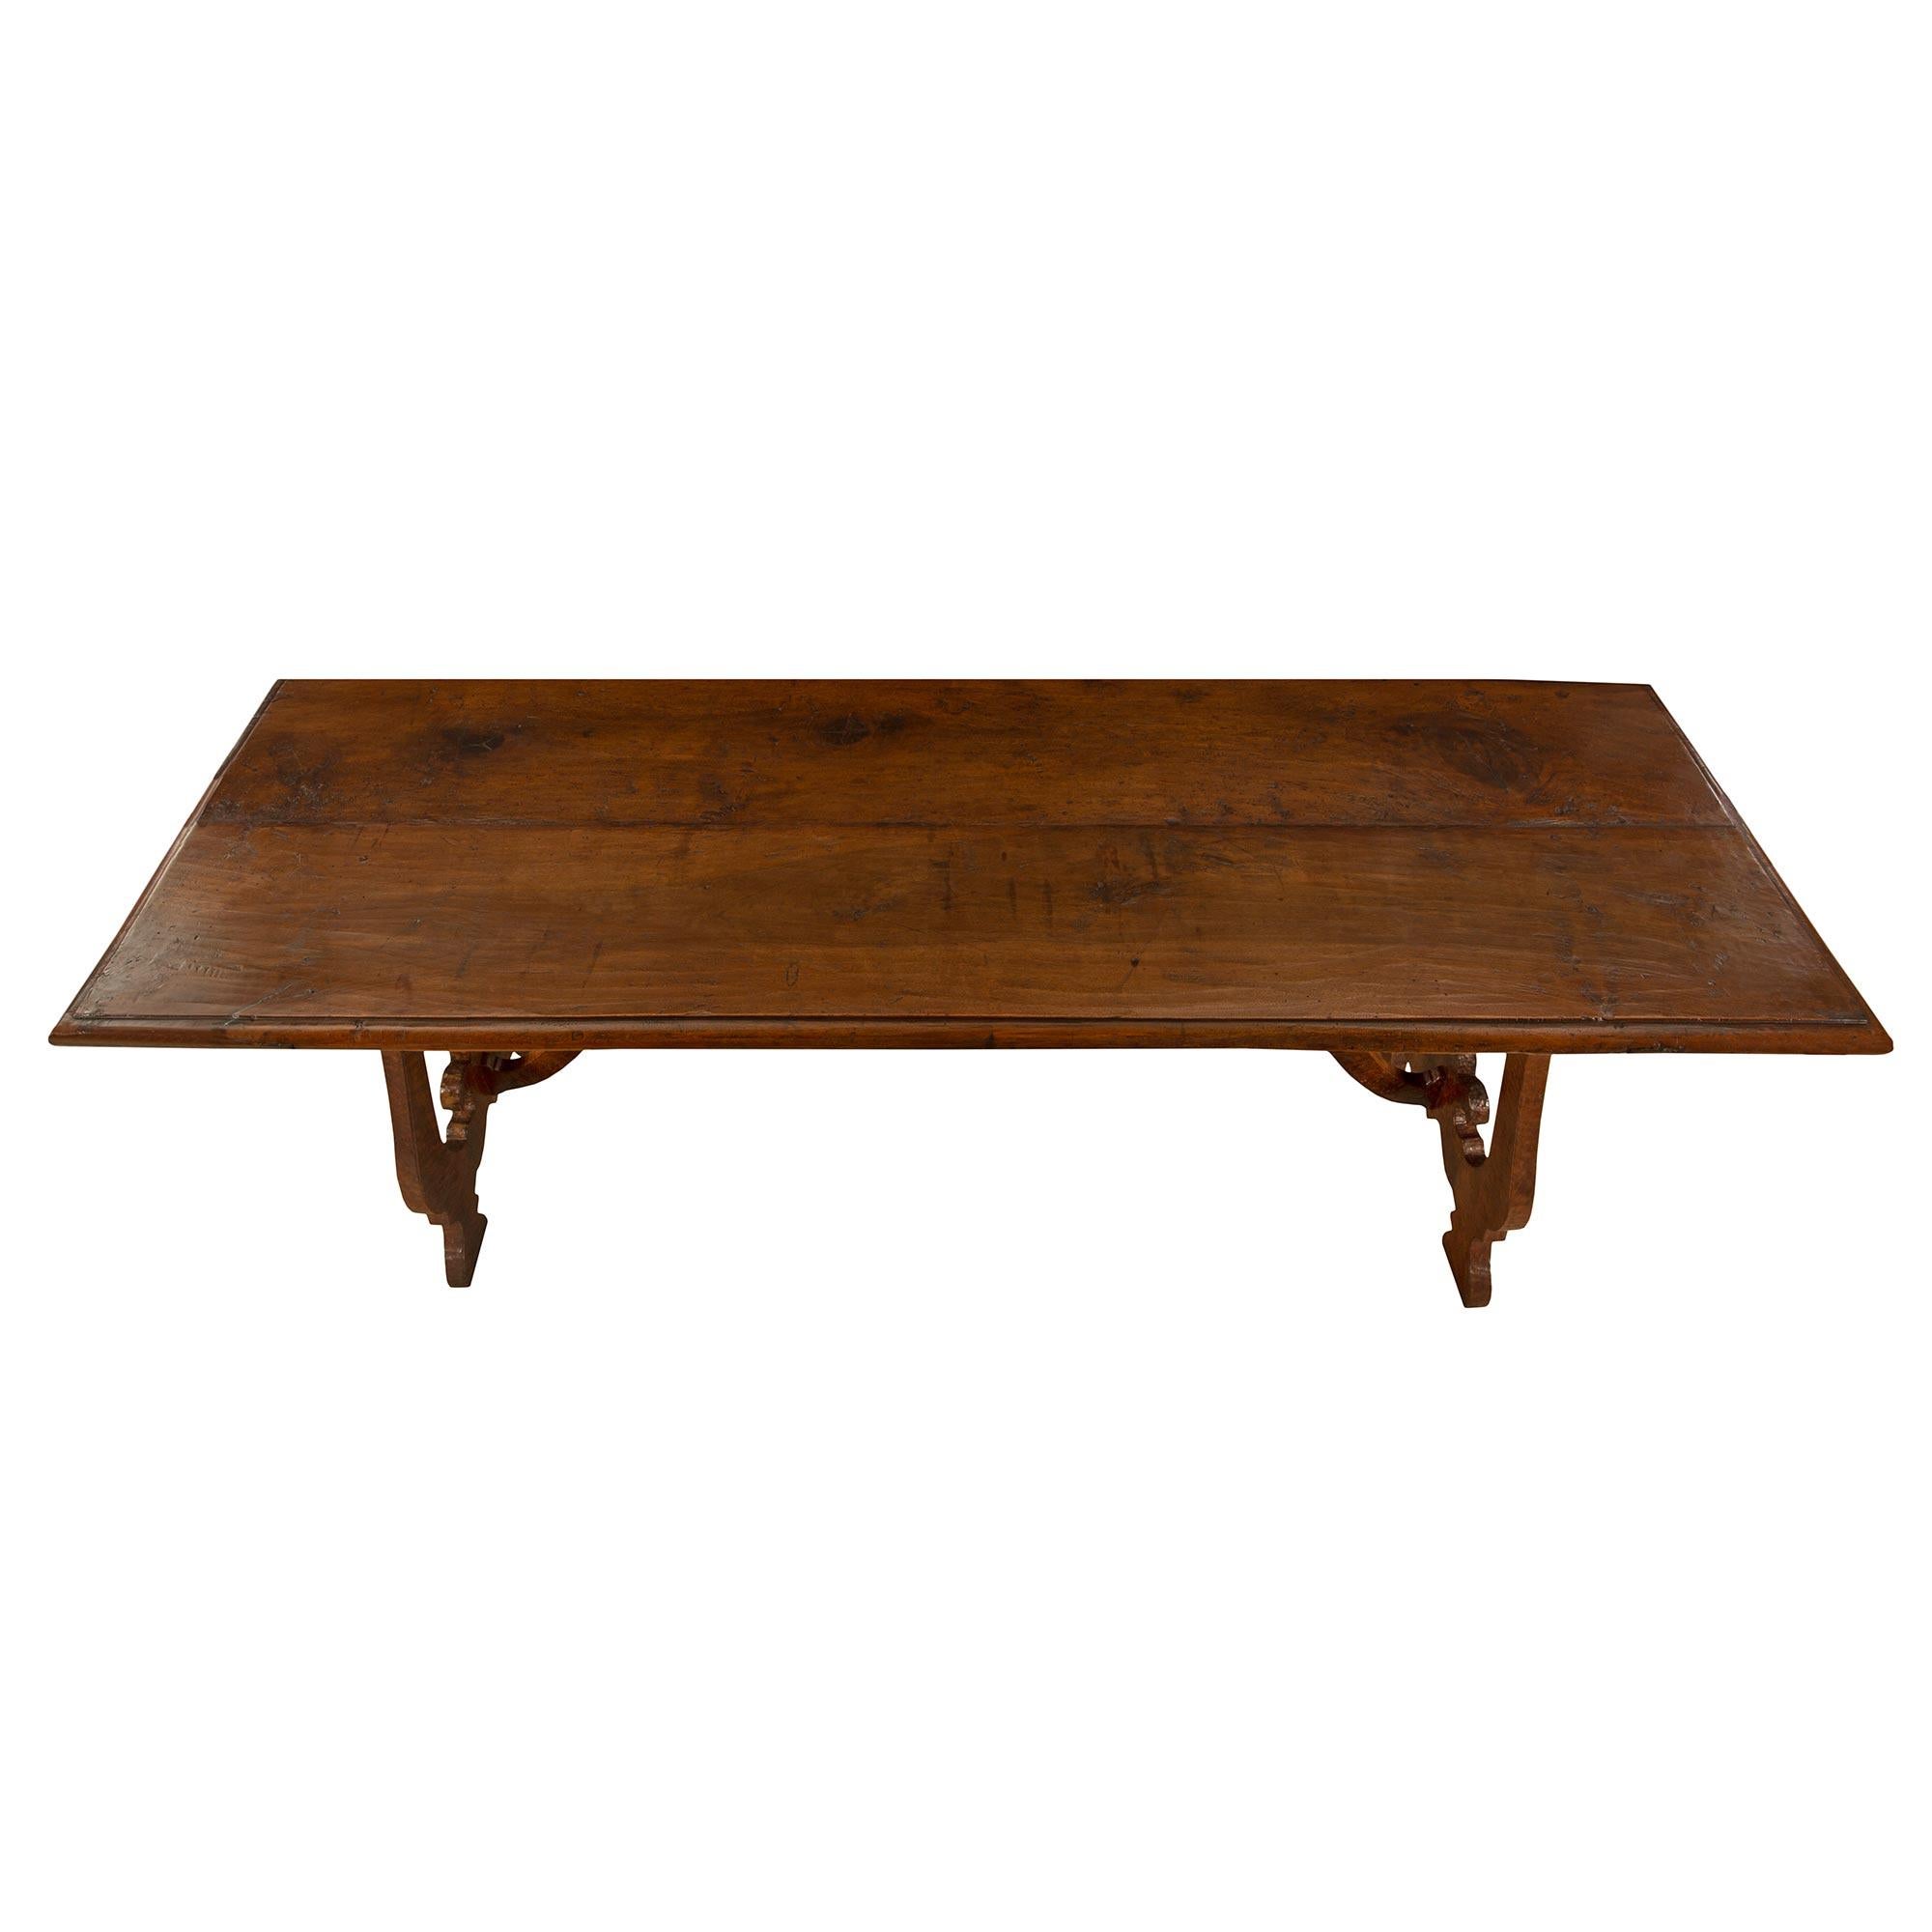 Spanish Early 18th Century Solid Walnut Trestle Table 3